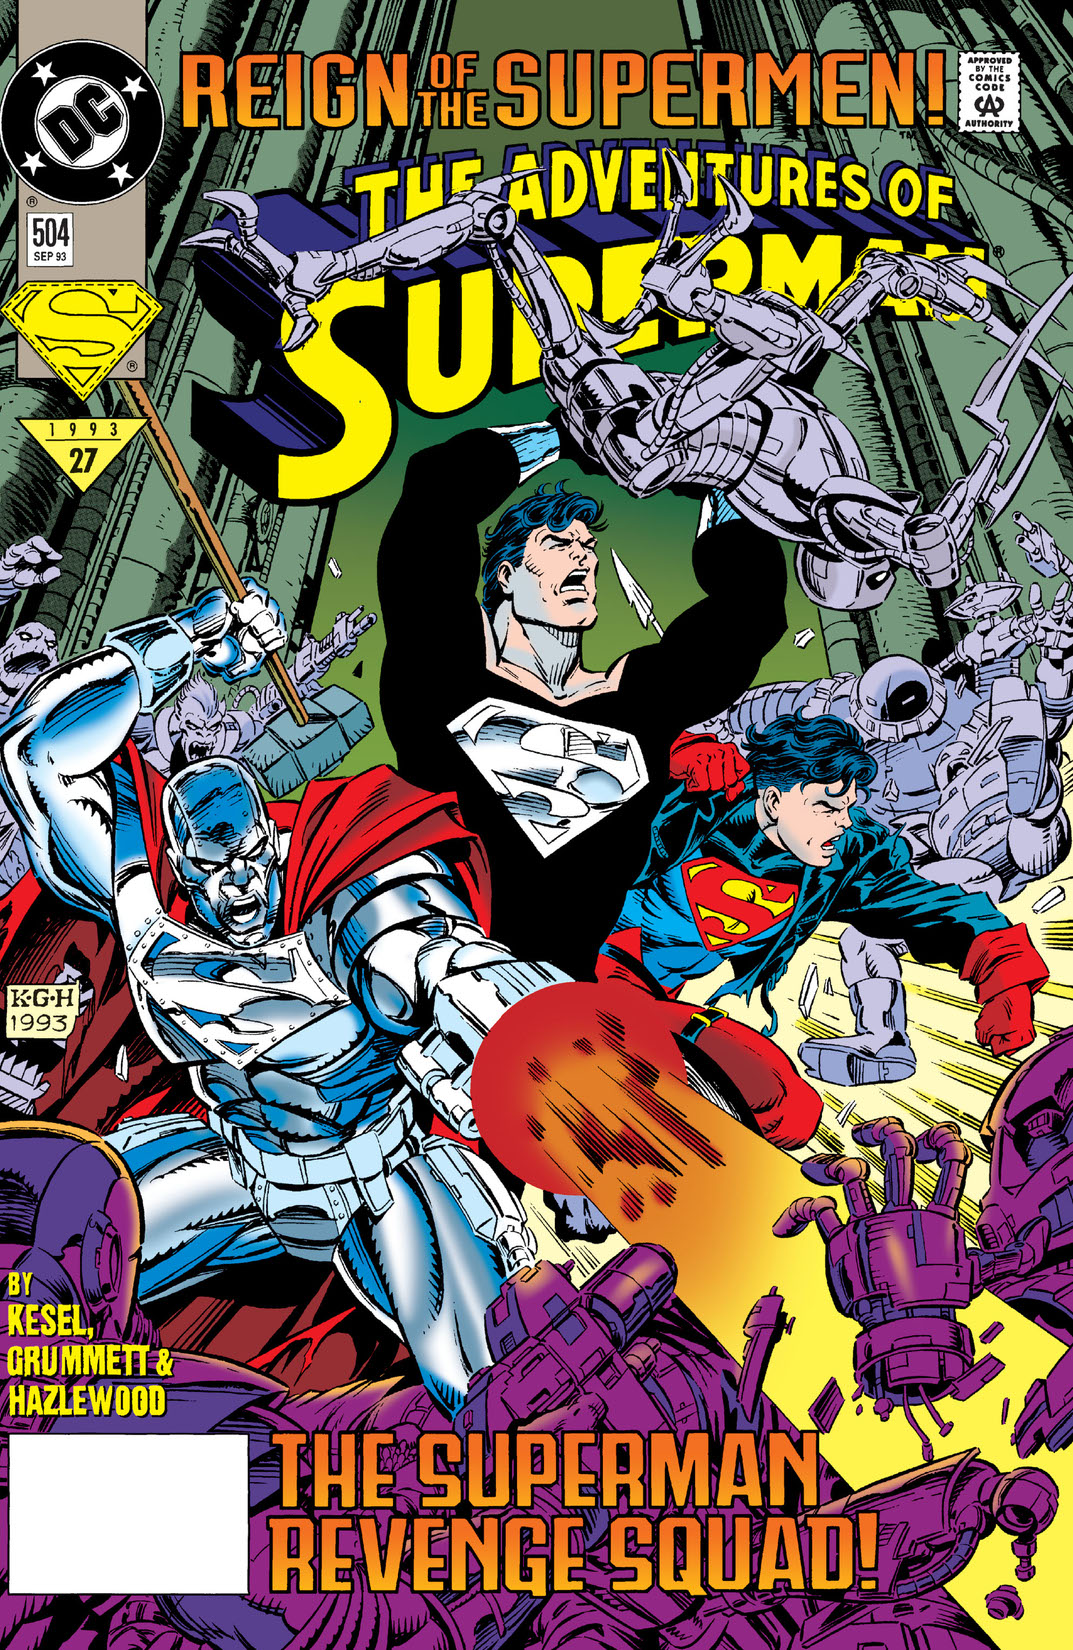 Adventures of Superman (1987-) #504 preview images